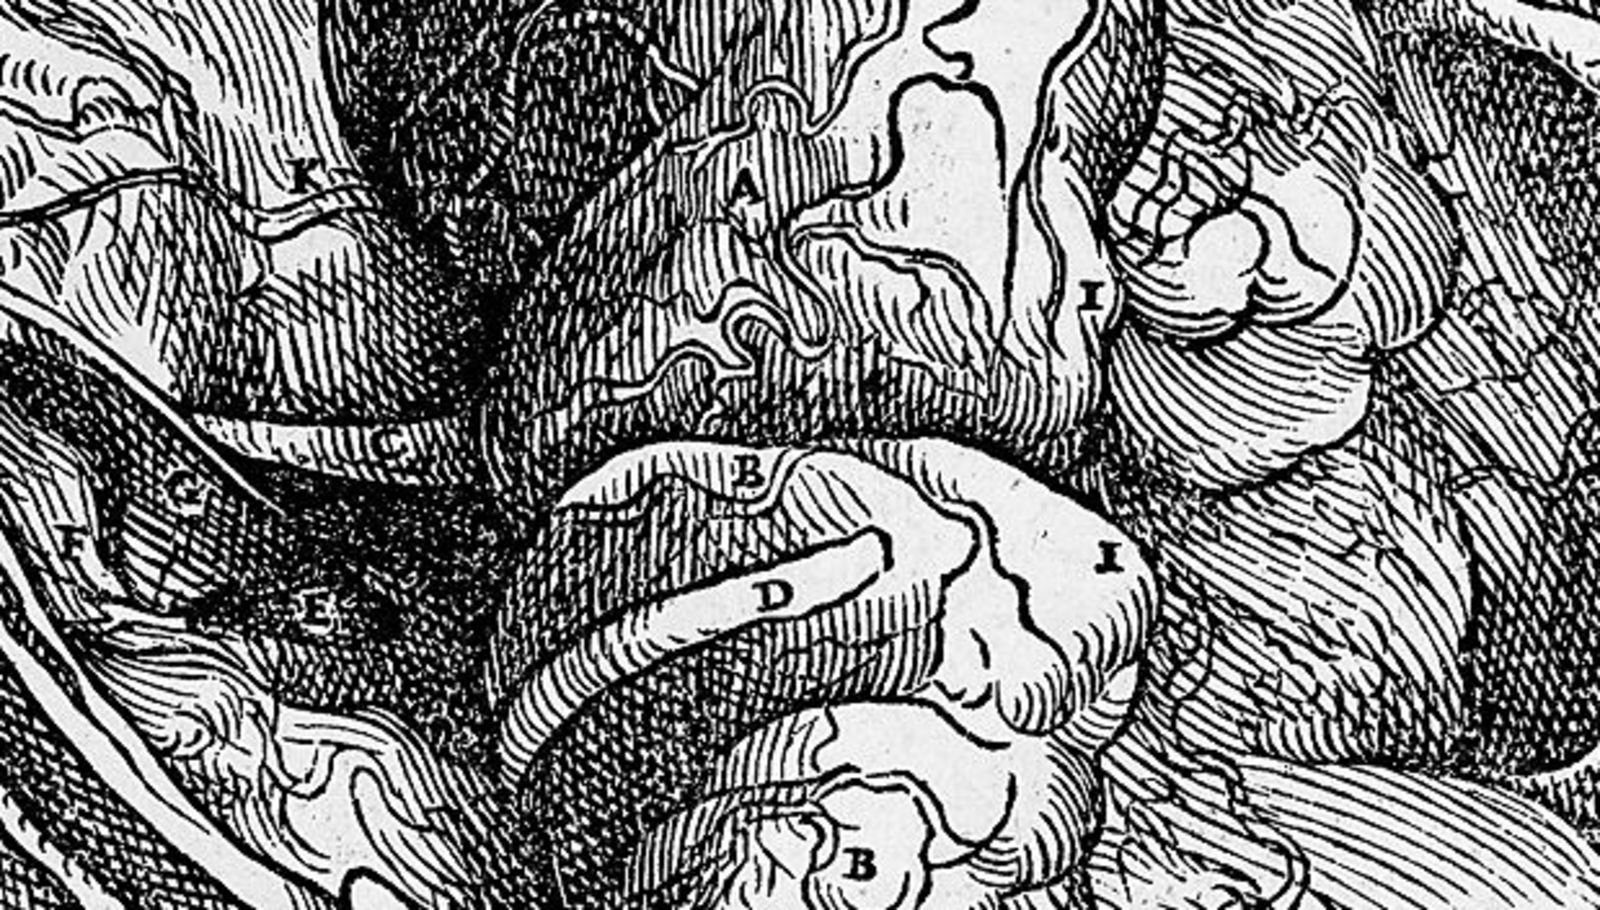 FIGURE 1 | Reproduction from a drawing of the brain in "De humani corporis fabrica libri septem" by the anatomist Andreas Vesalius (Basel, 1543) Source: Wikimedia Commons